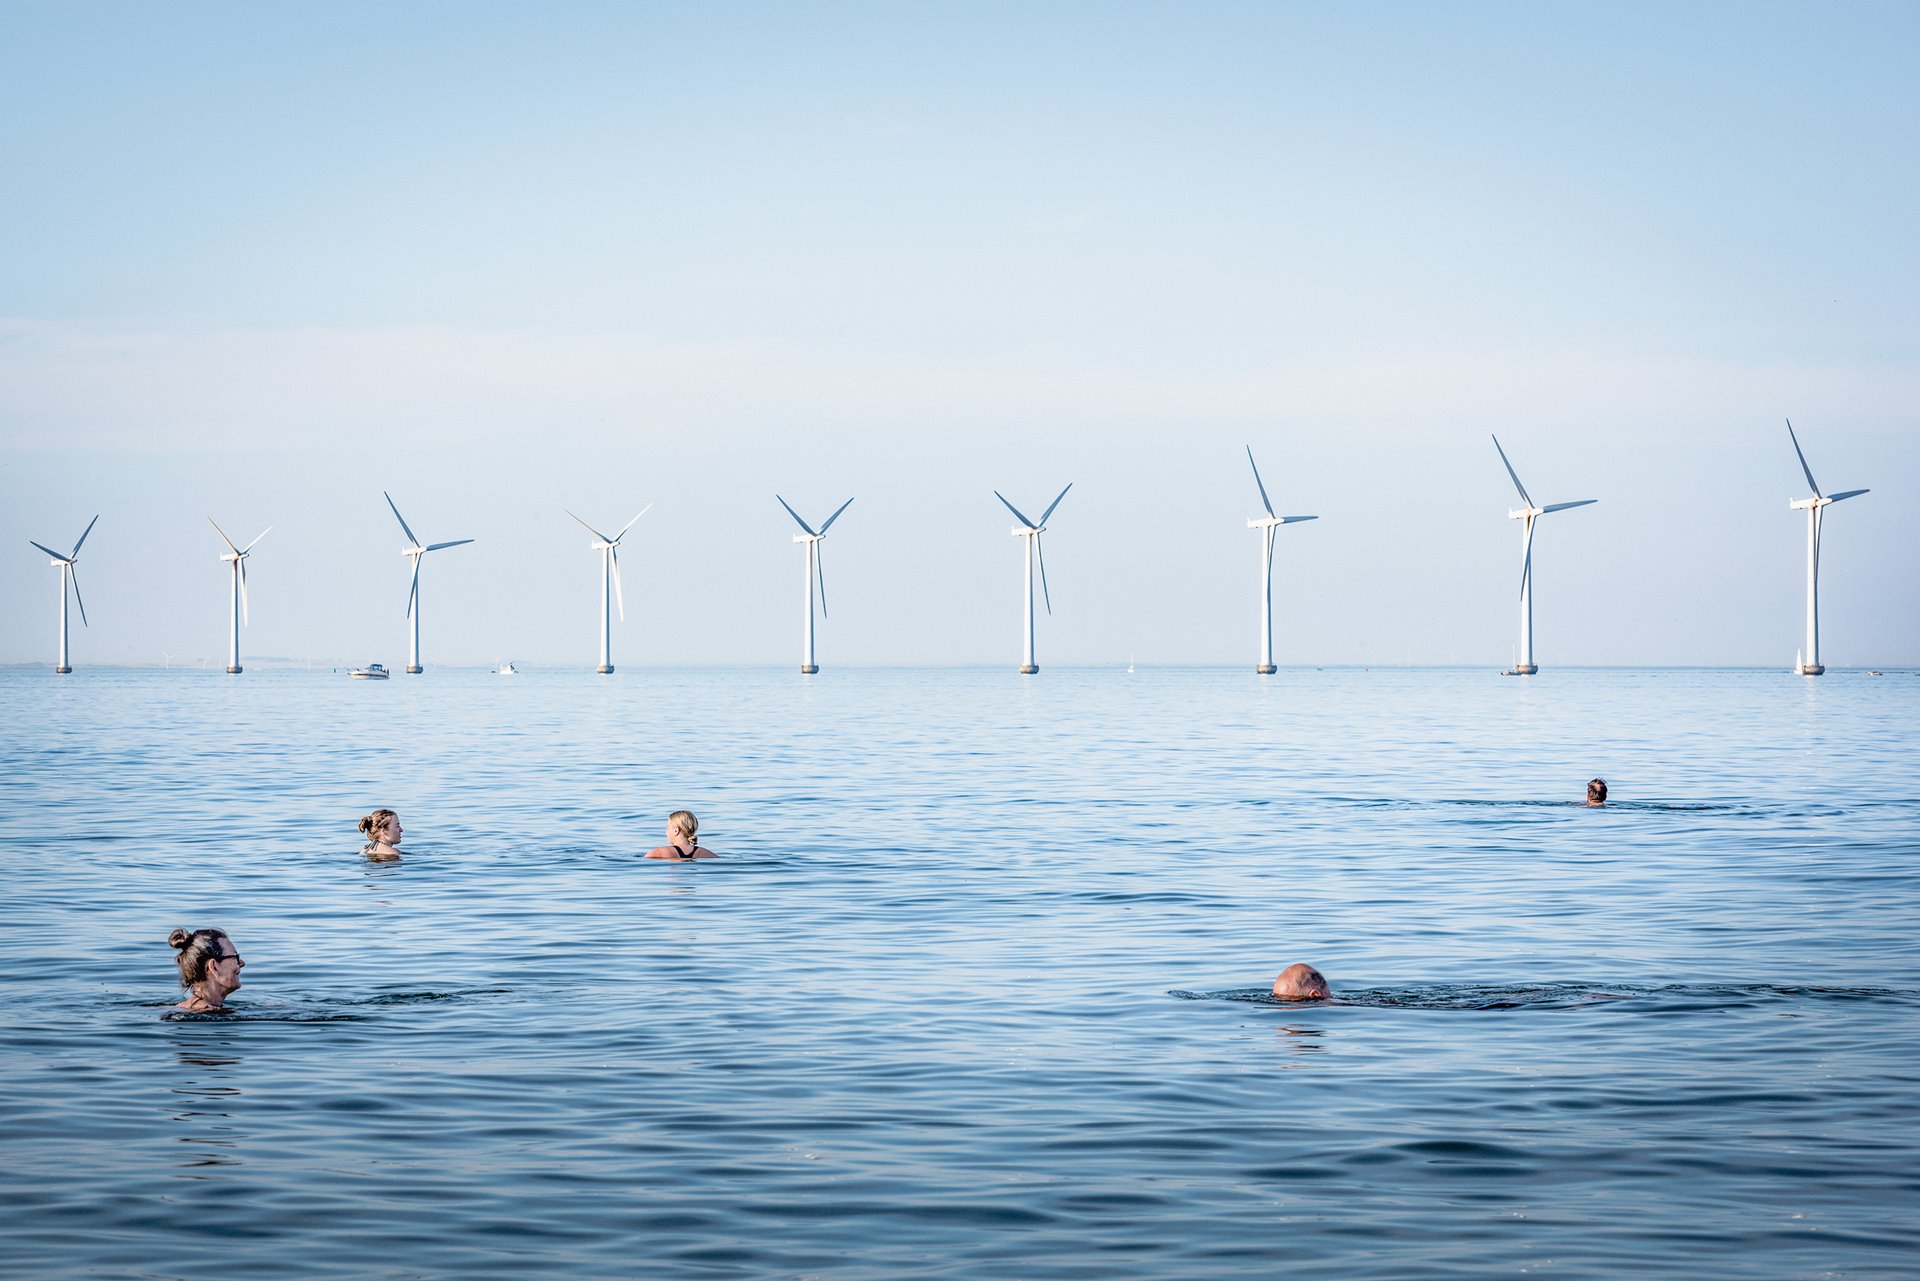 <p>People swim at Amager Strand, Denmark, near a wind farm which is co-owned by 8,552 electricity consumers, and serves more than 40,000 Copenhagen households. Upwards of 150,000 Danish families are members of similar wind-turbine cooperatives.</p>
